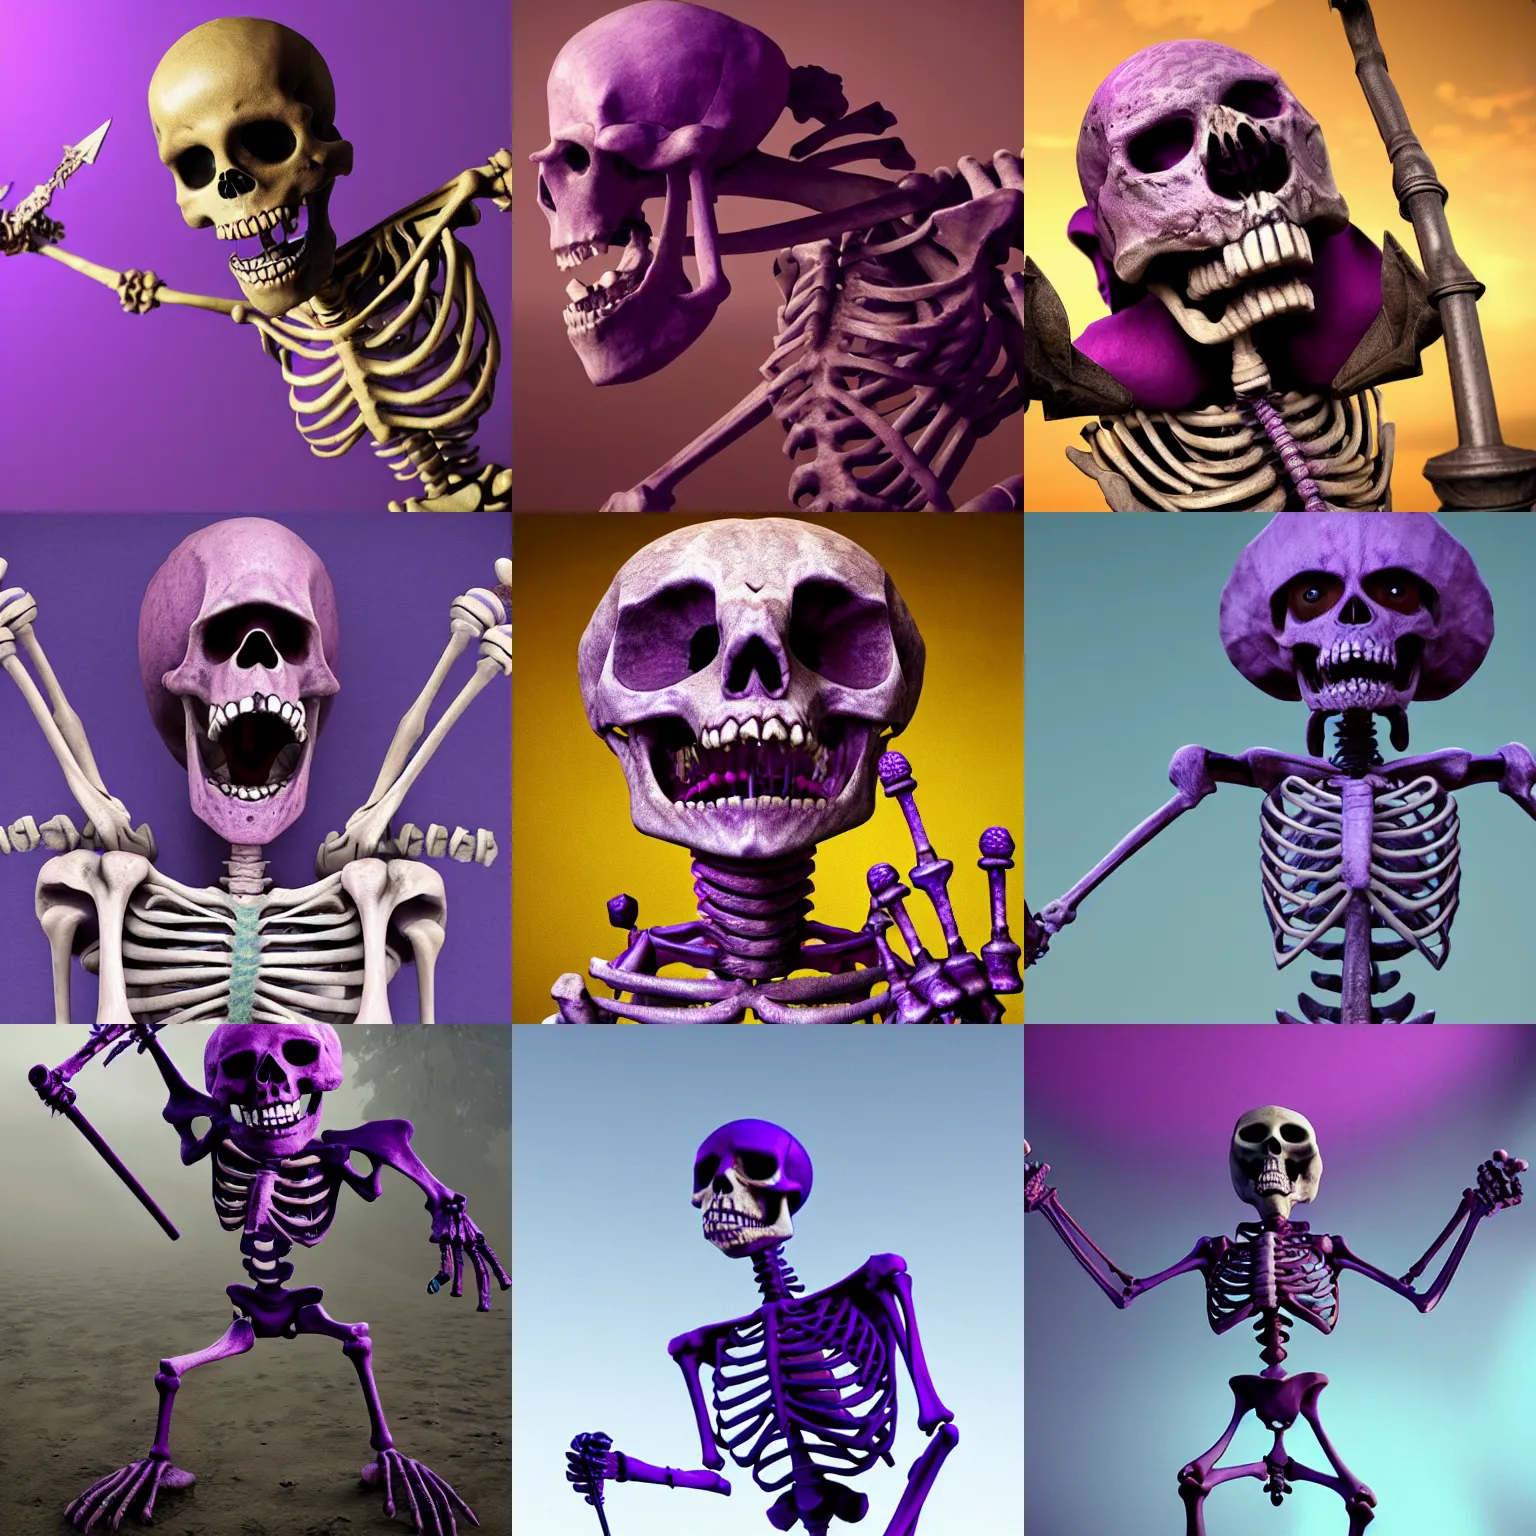 SKELETONS wallpaper by sxcrly  Download on ZEDGE  5666